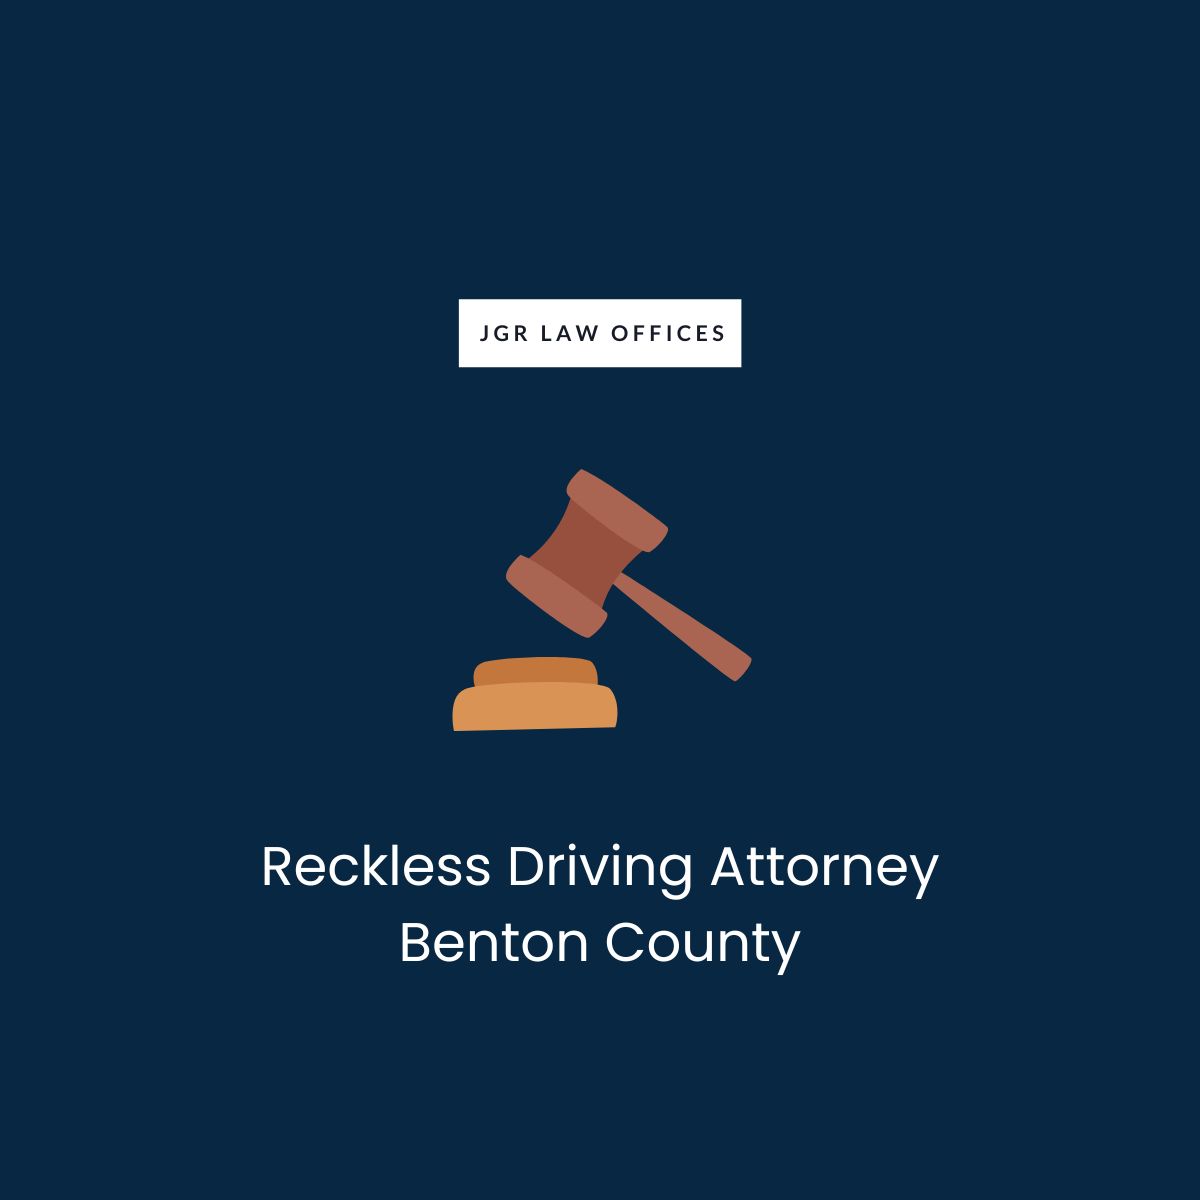 Reckless Driving Attorney Benton County